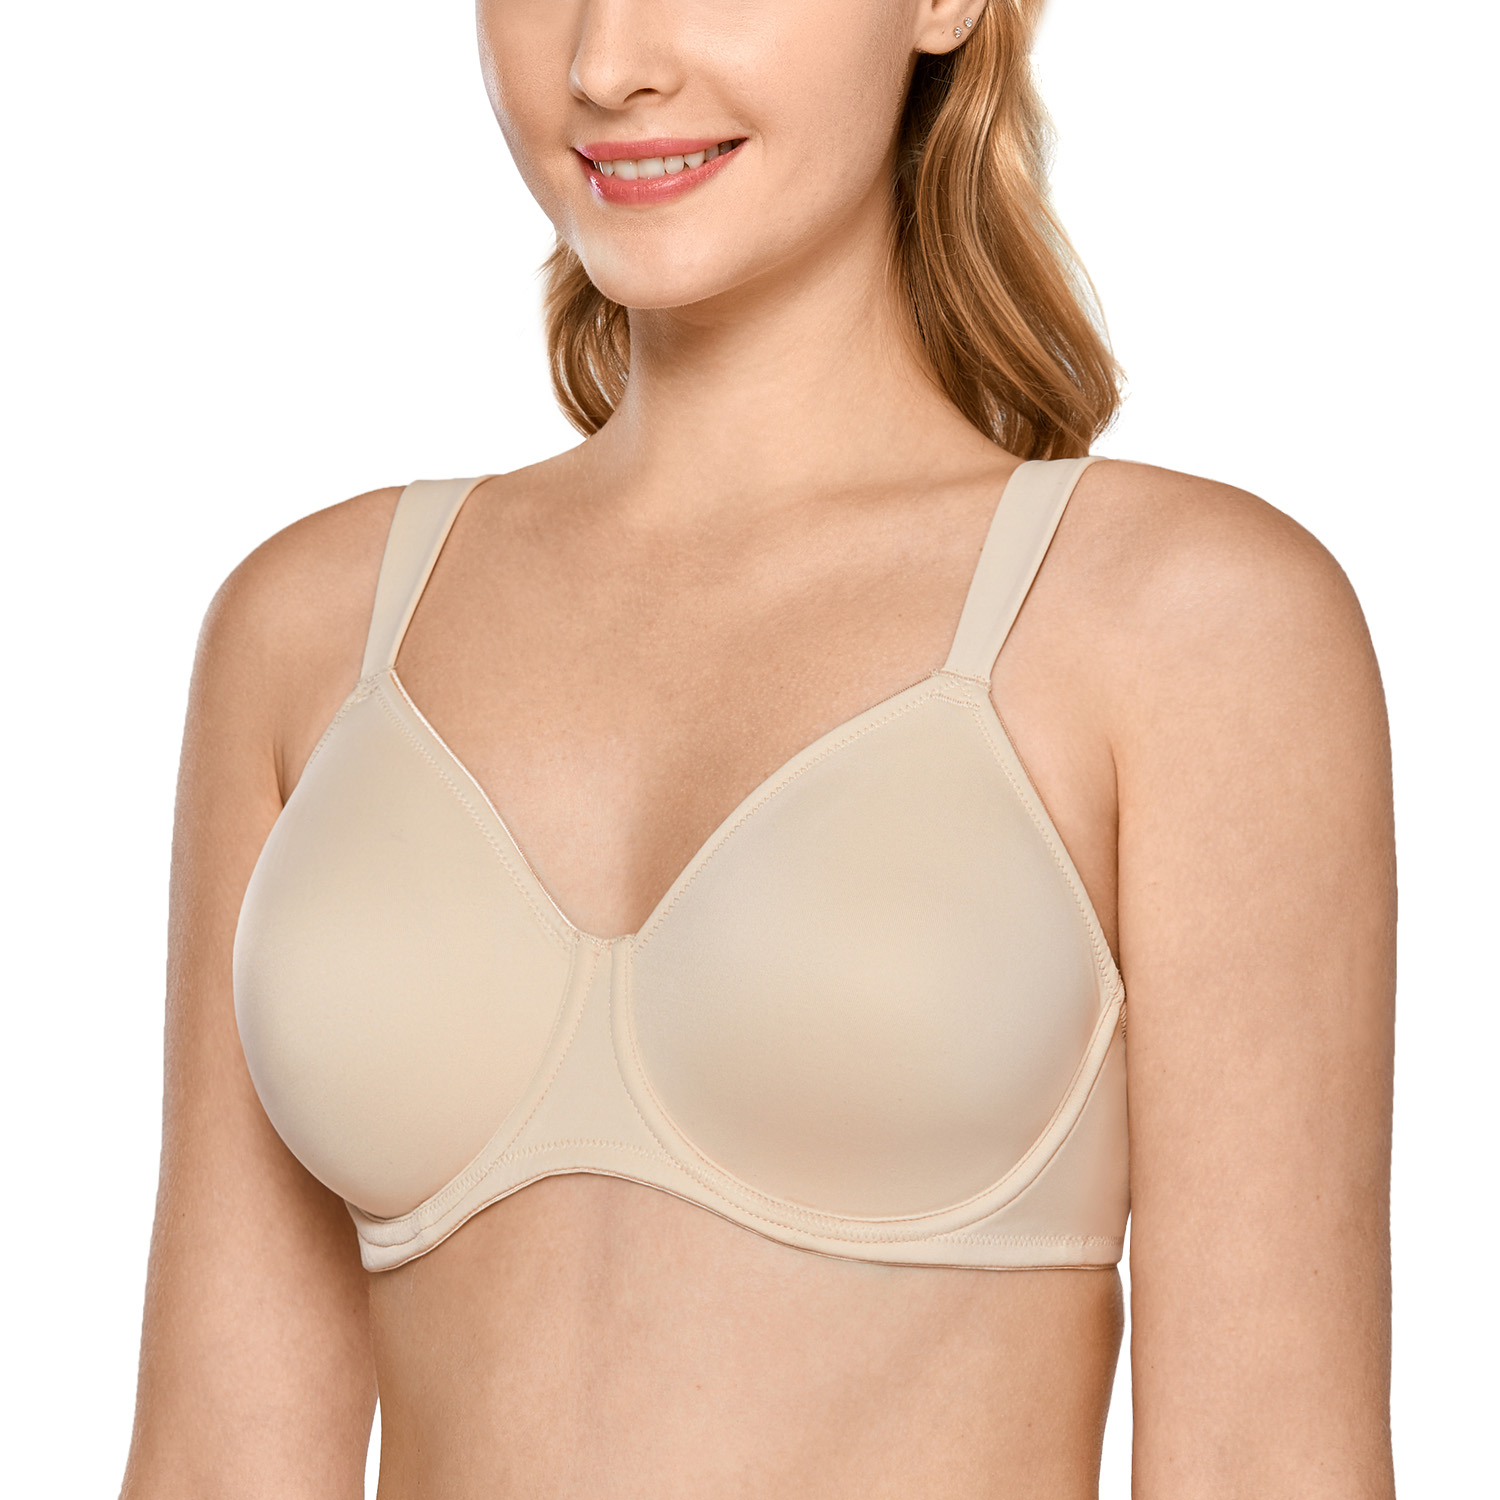 Women's Non-padded Minimizer Bra Full Coverage Smooth Underwire